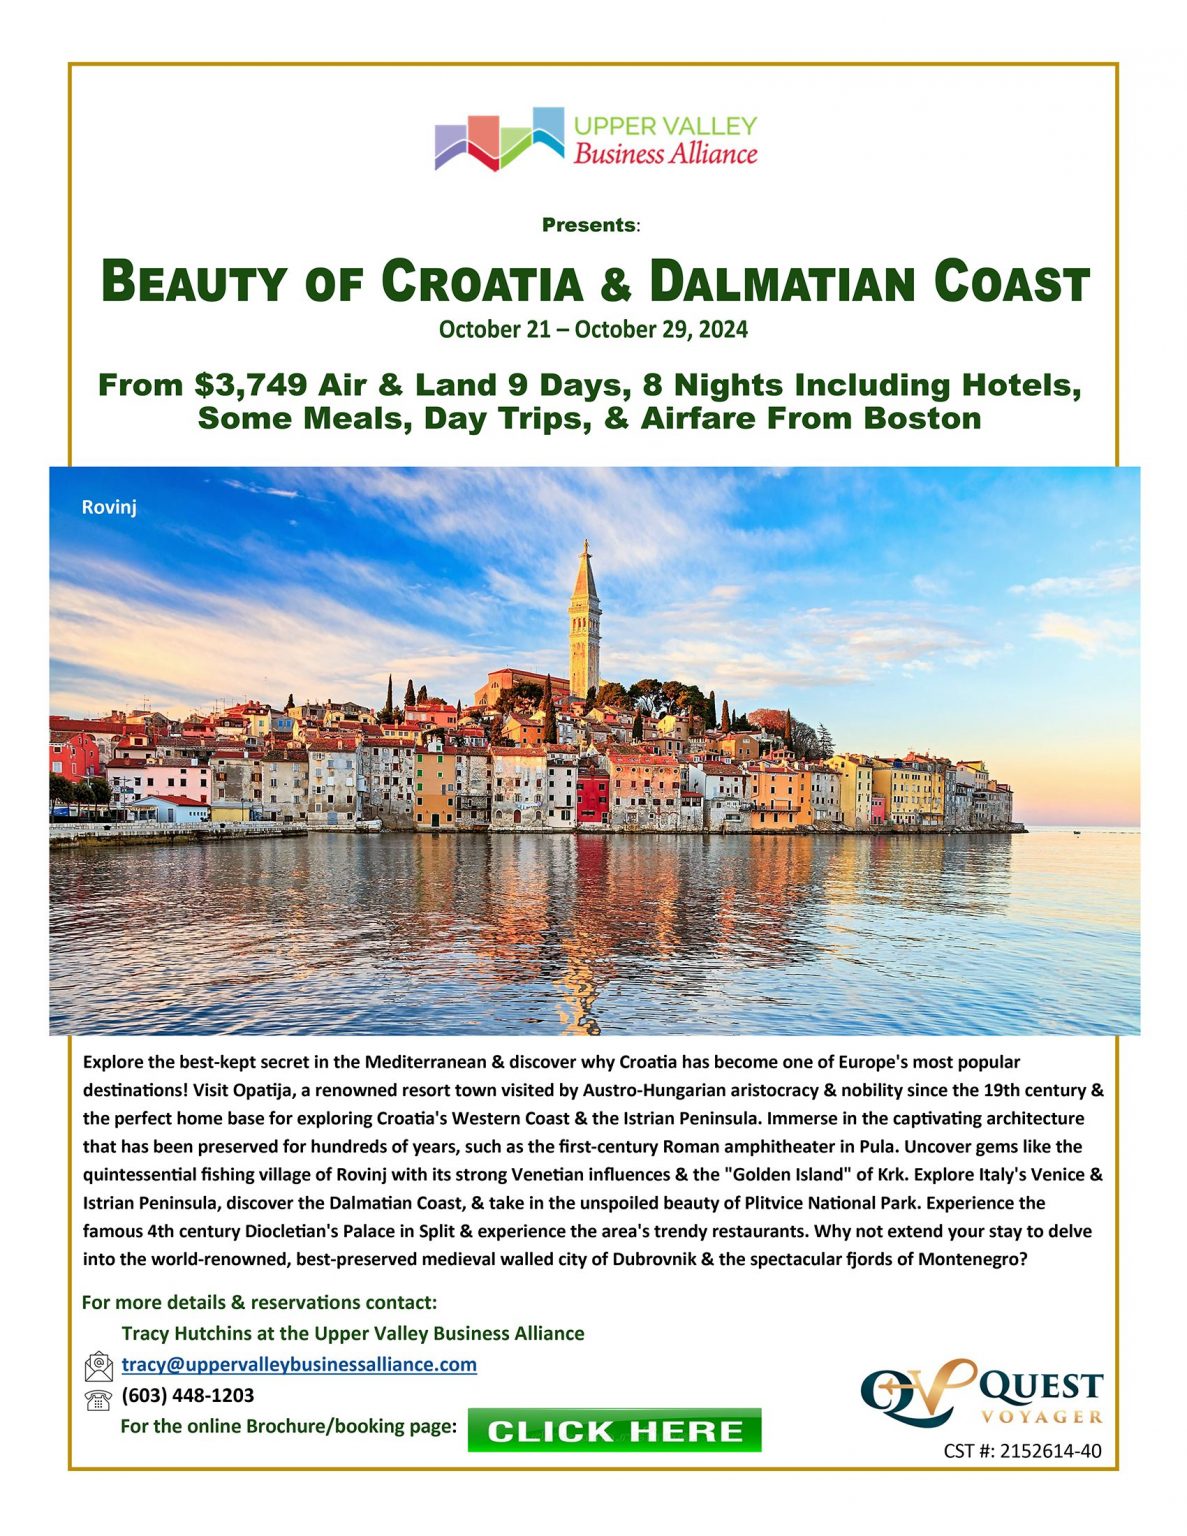 Take a trip to Croatia with Upper Valley Business Alliance